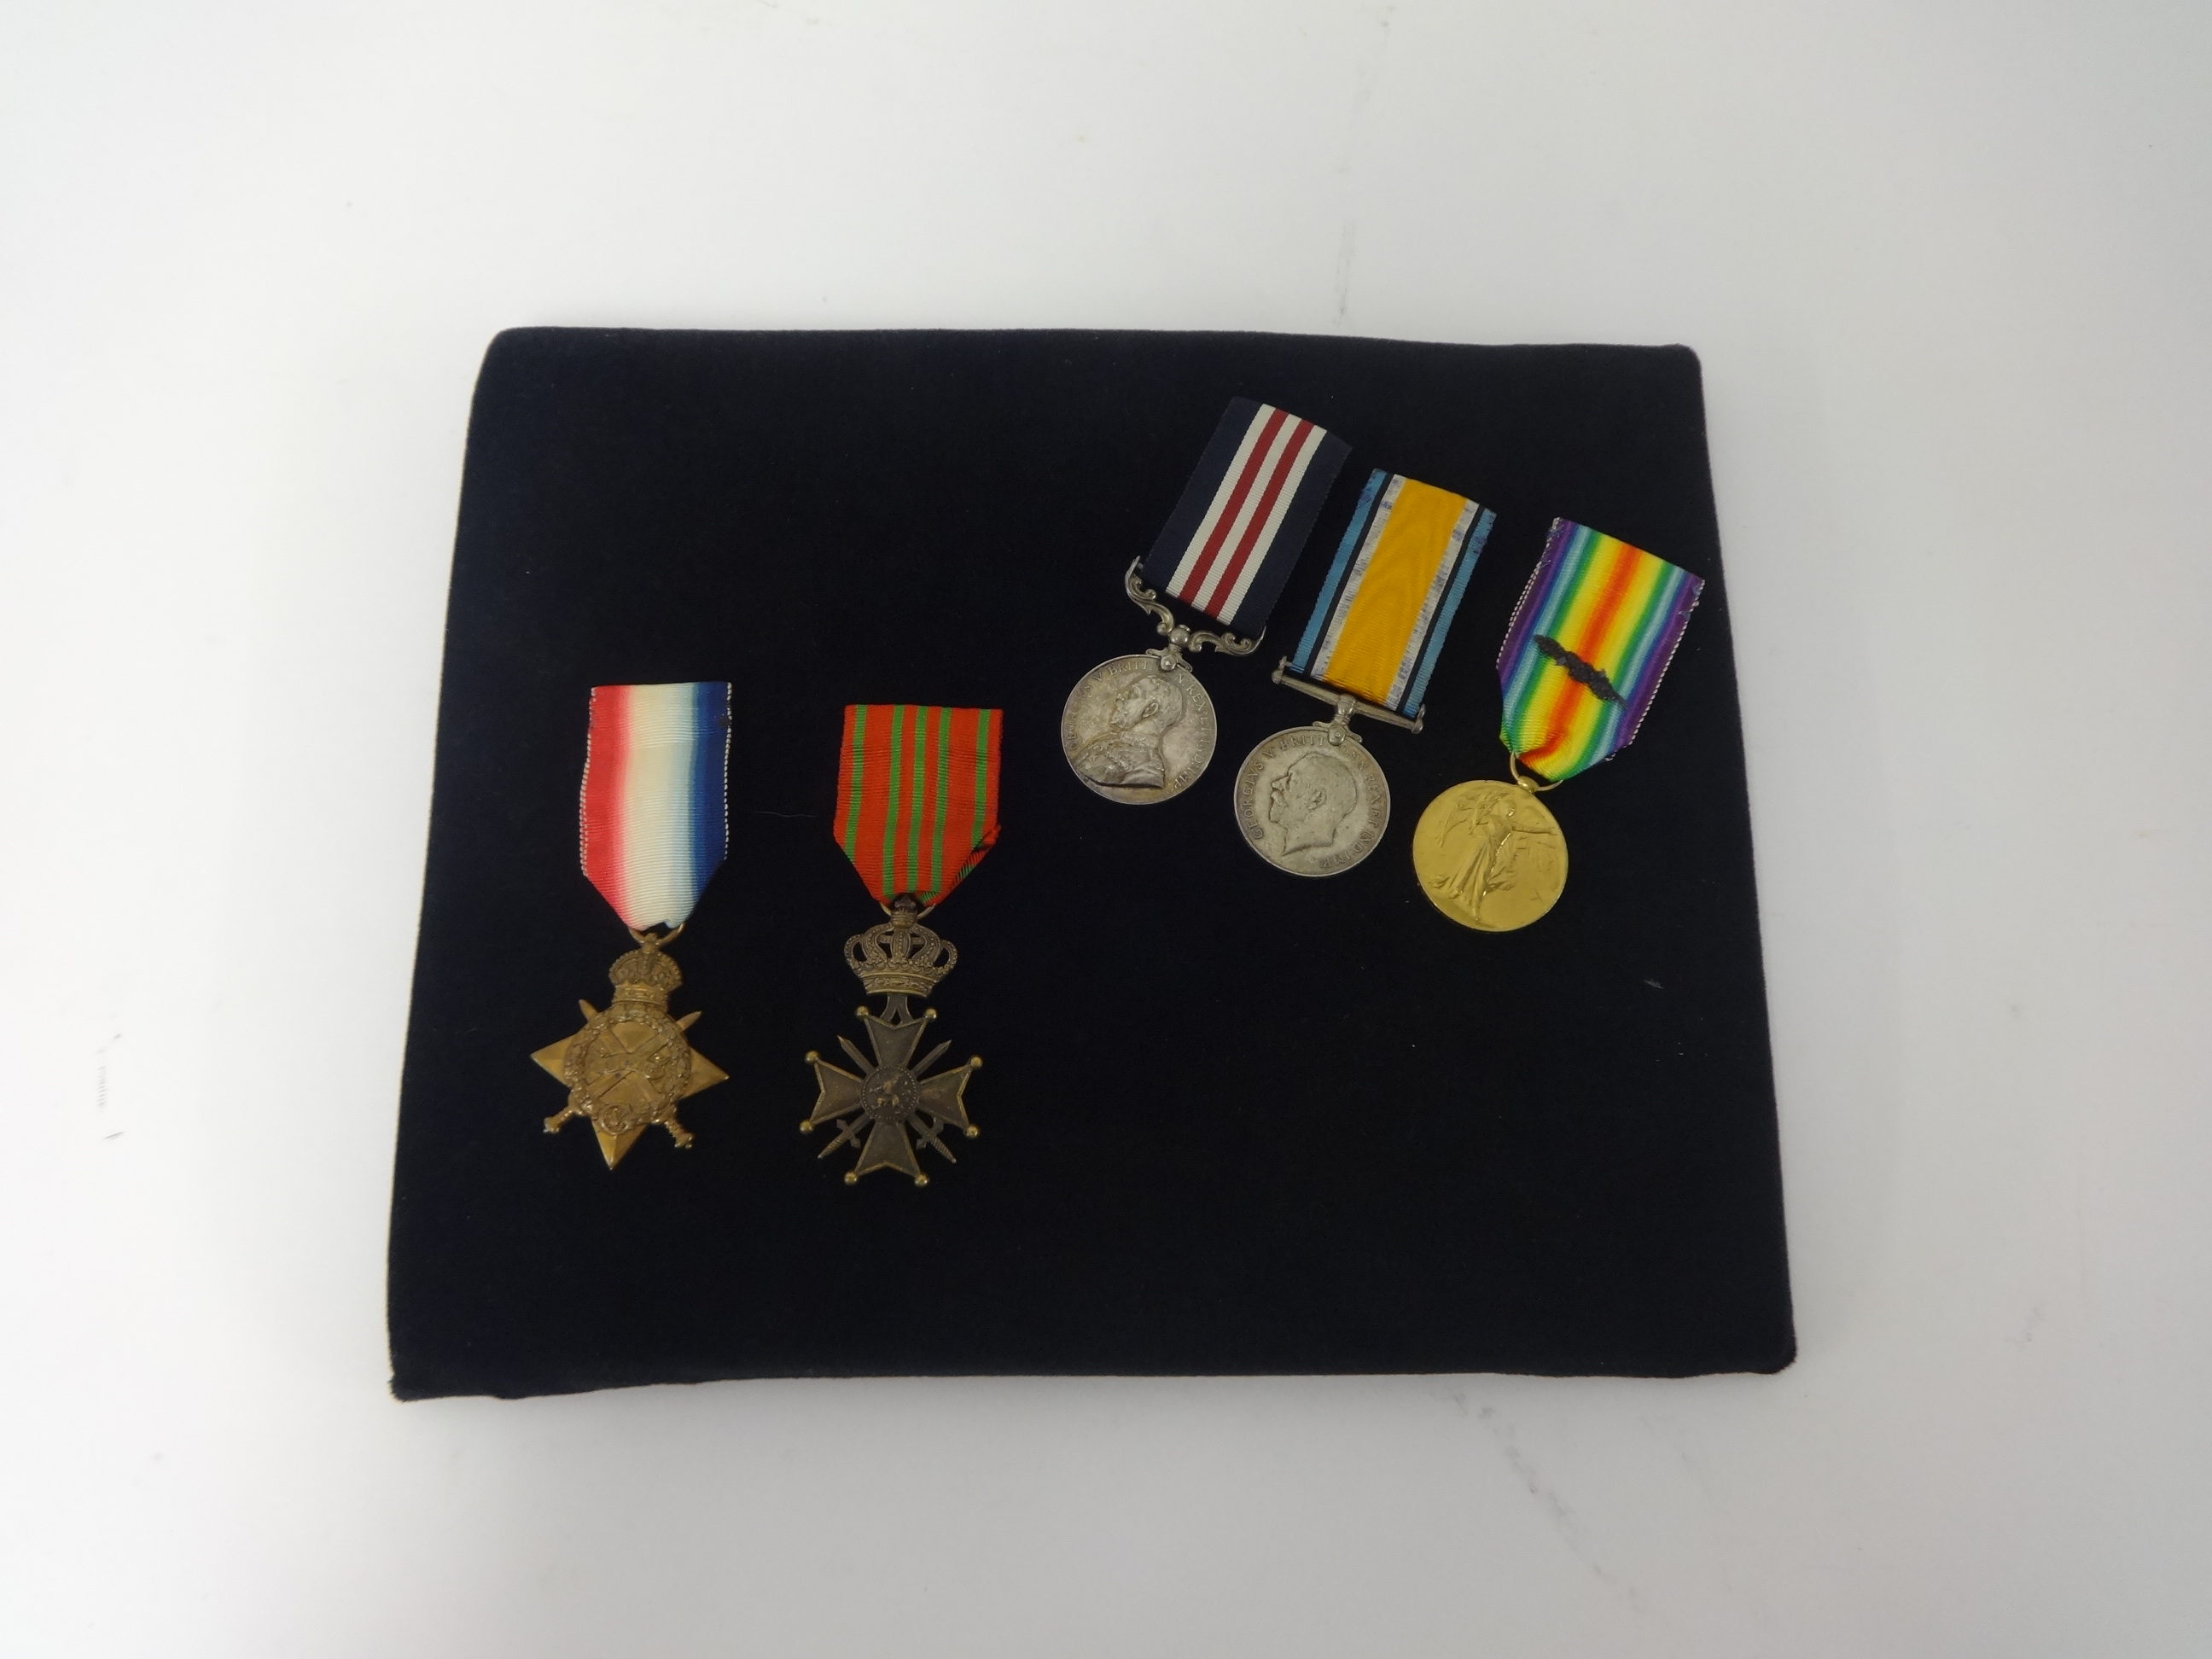 Five Great War Medals including the Military Medal (MM) awarded to SGT. A. (Arthur) BOUGHTON 1/ - Image 5 of 6